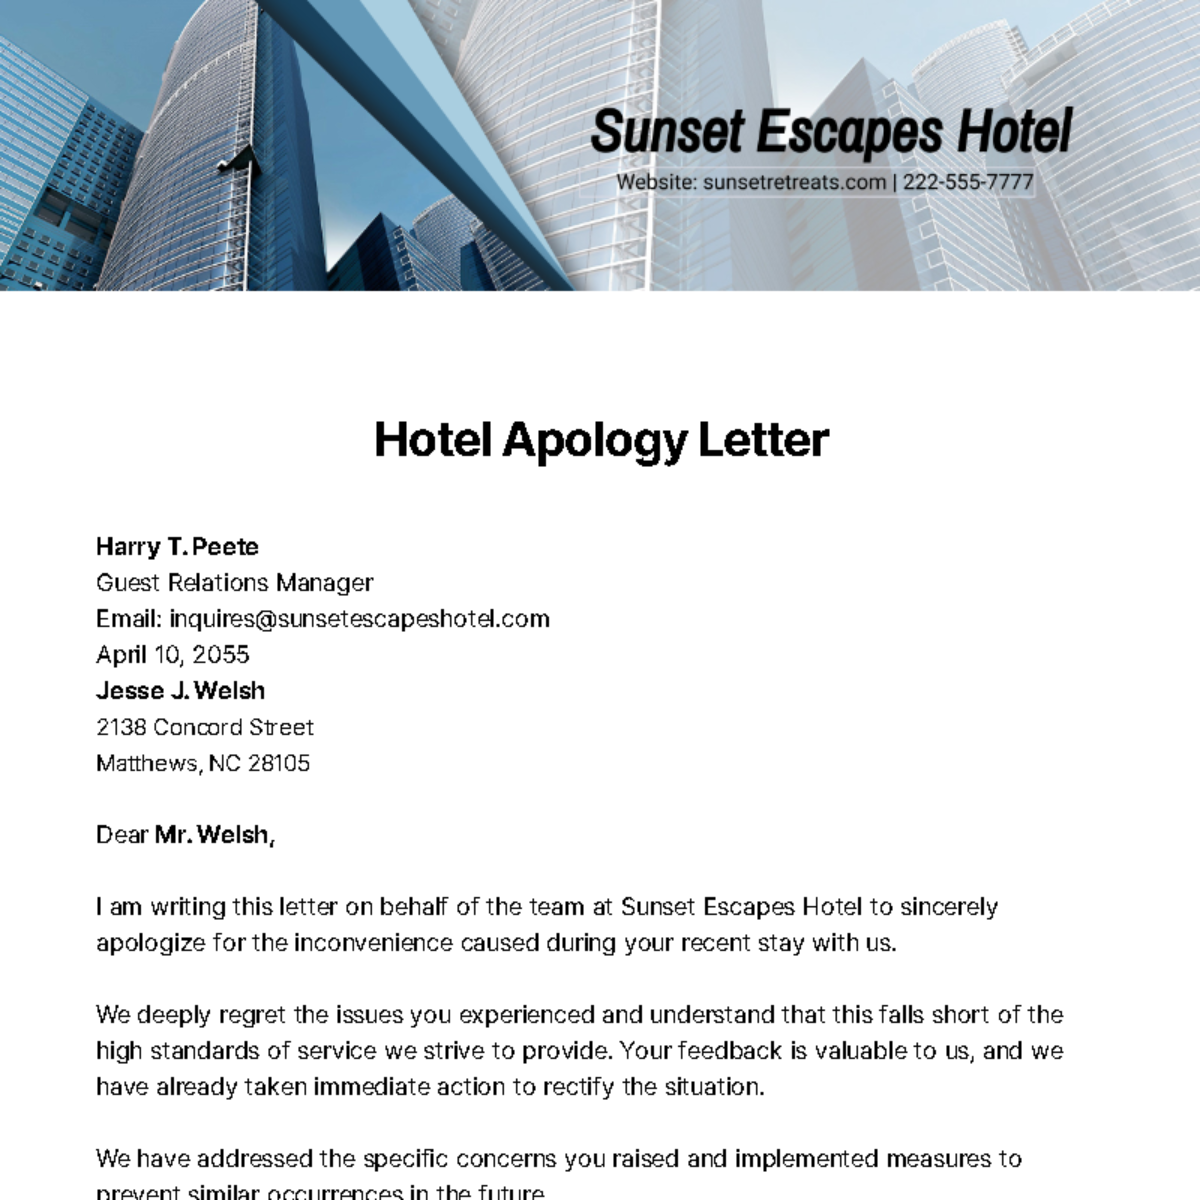 Hotel Apology Letter   Template